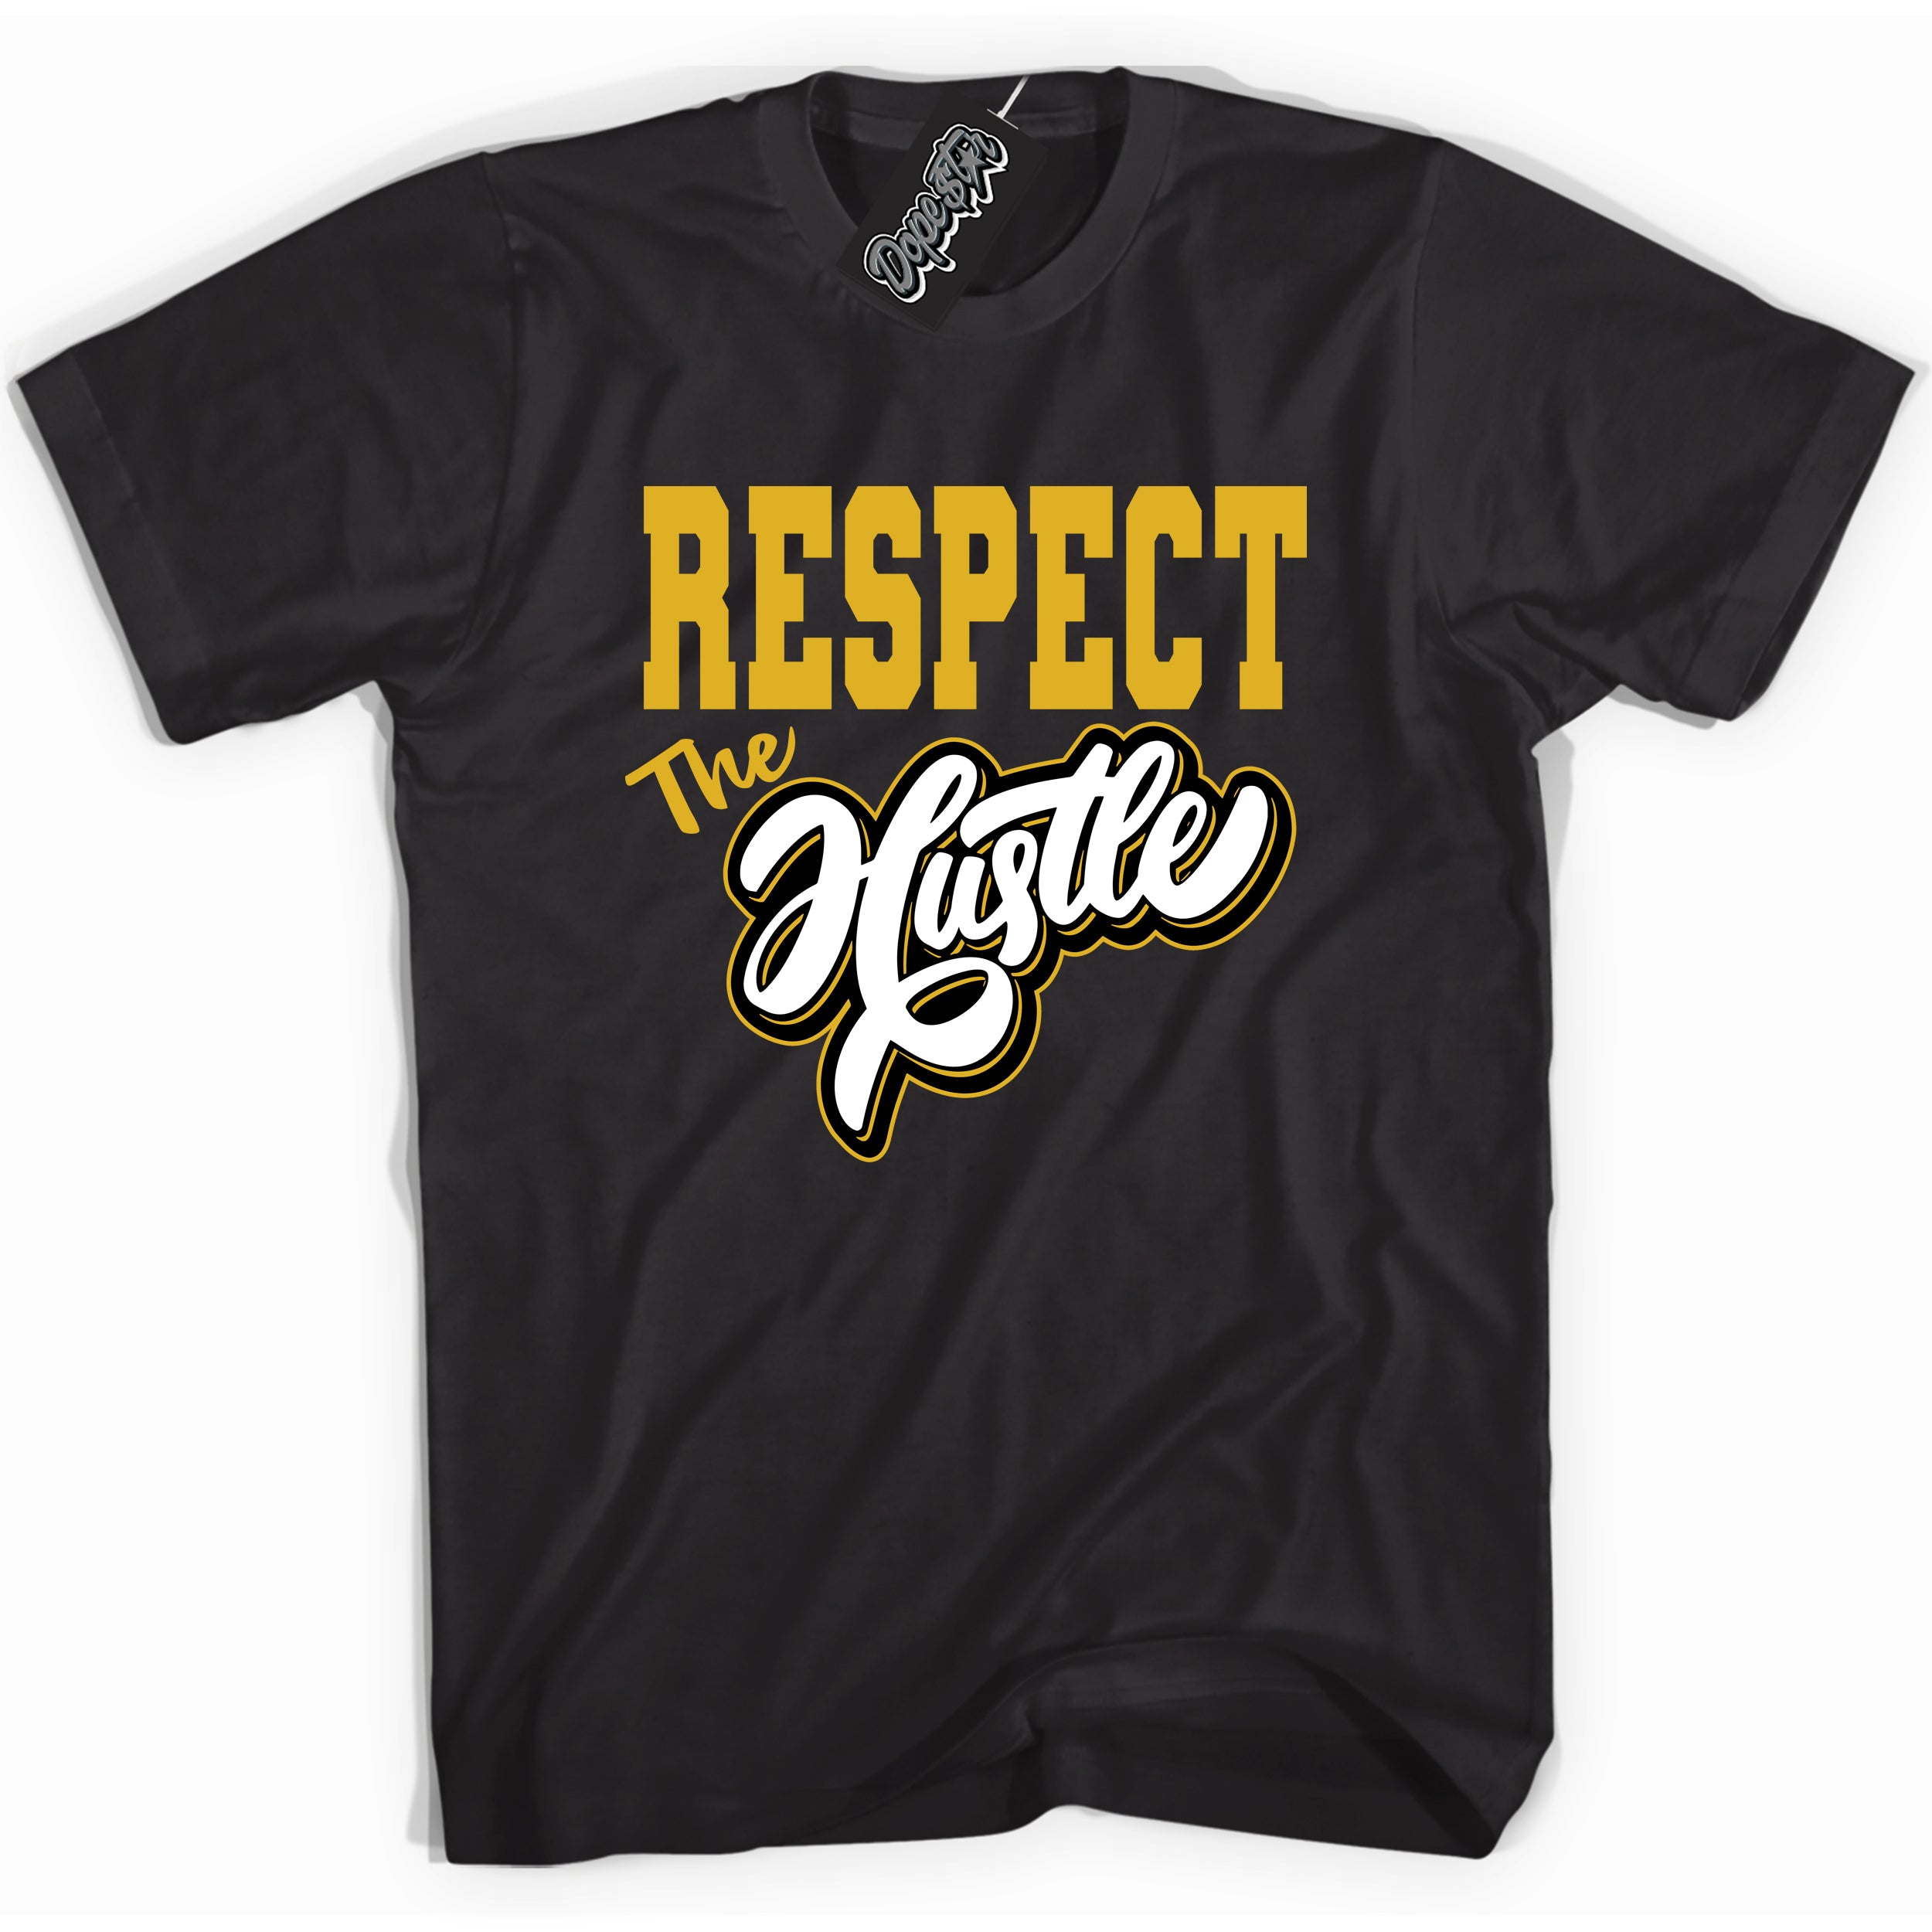 Cool black Shirt with “ Respect The Hustle” design that perfectly matches Yellow Ochre 6s Sneakers.